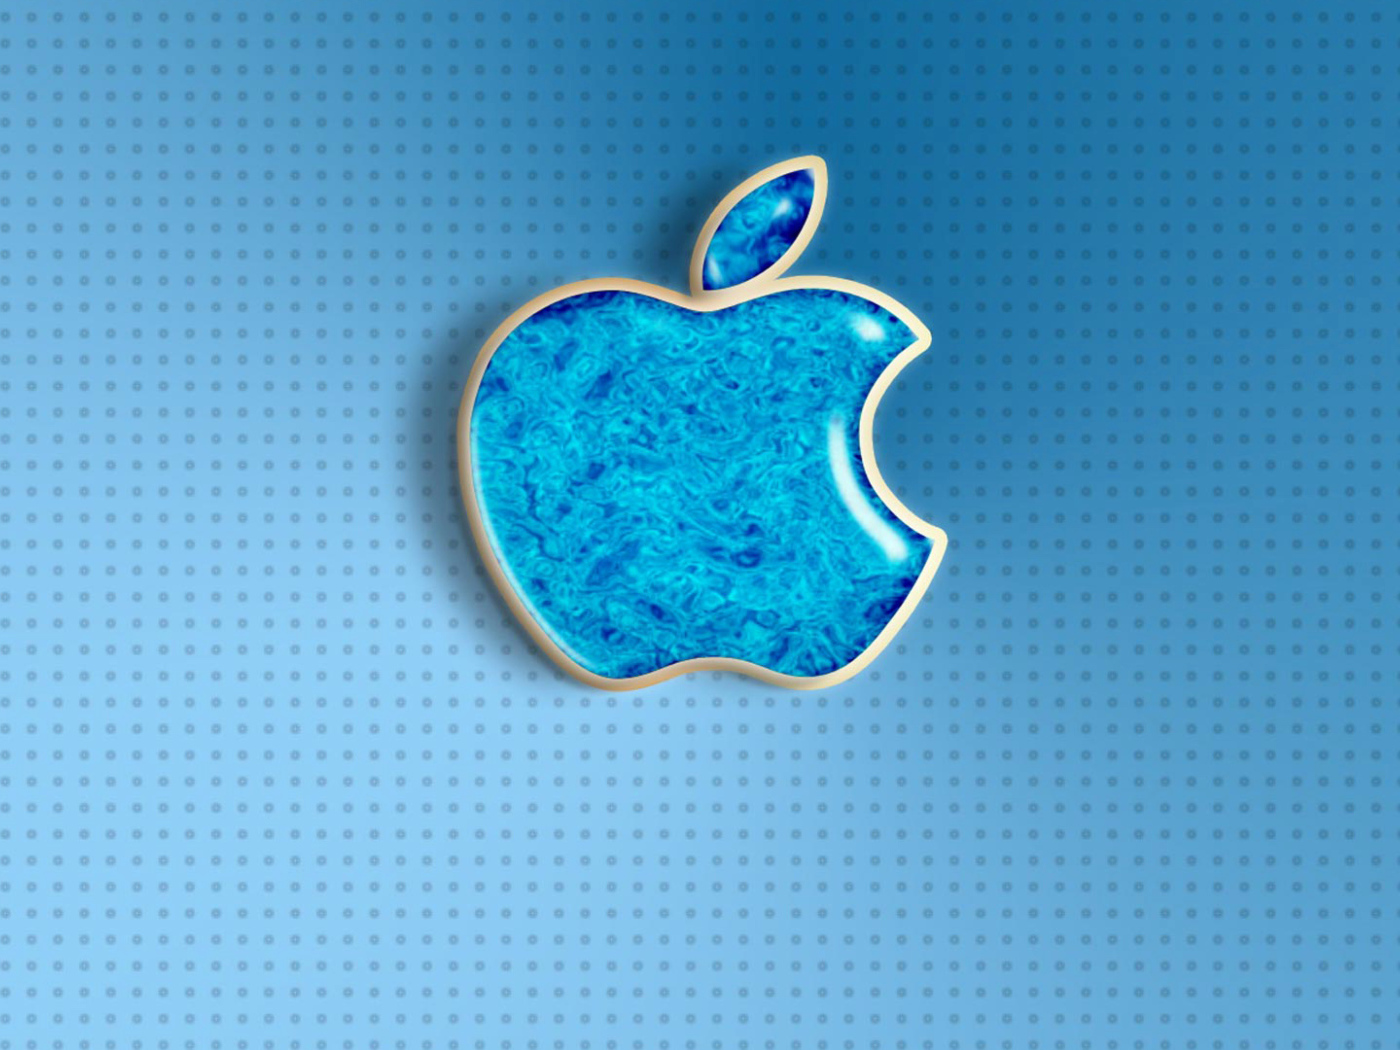 Blue apple icon on a background with dots.